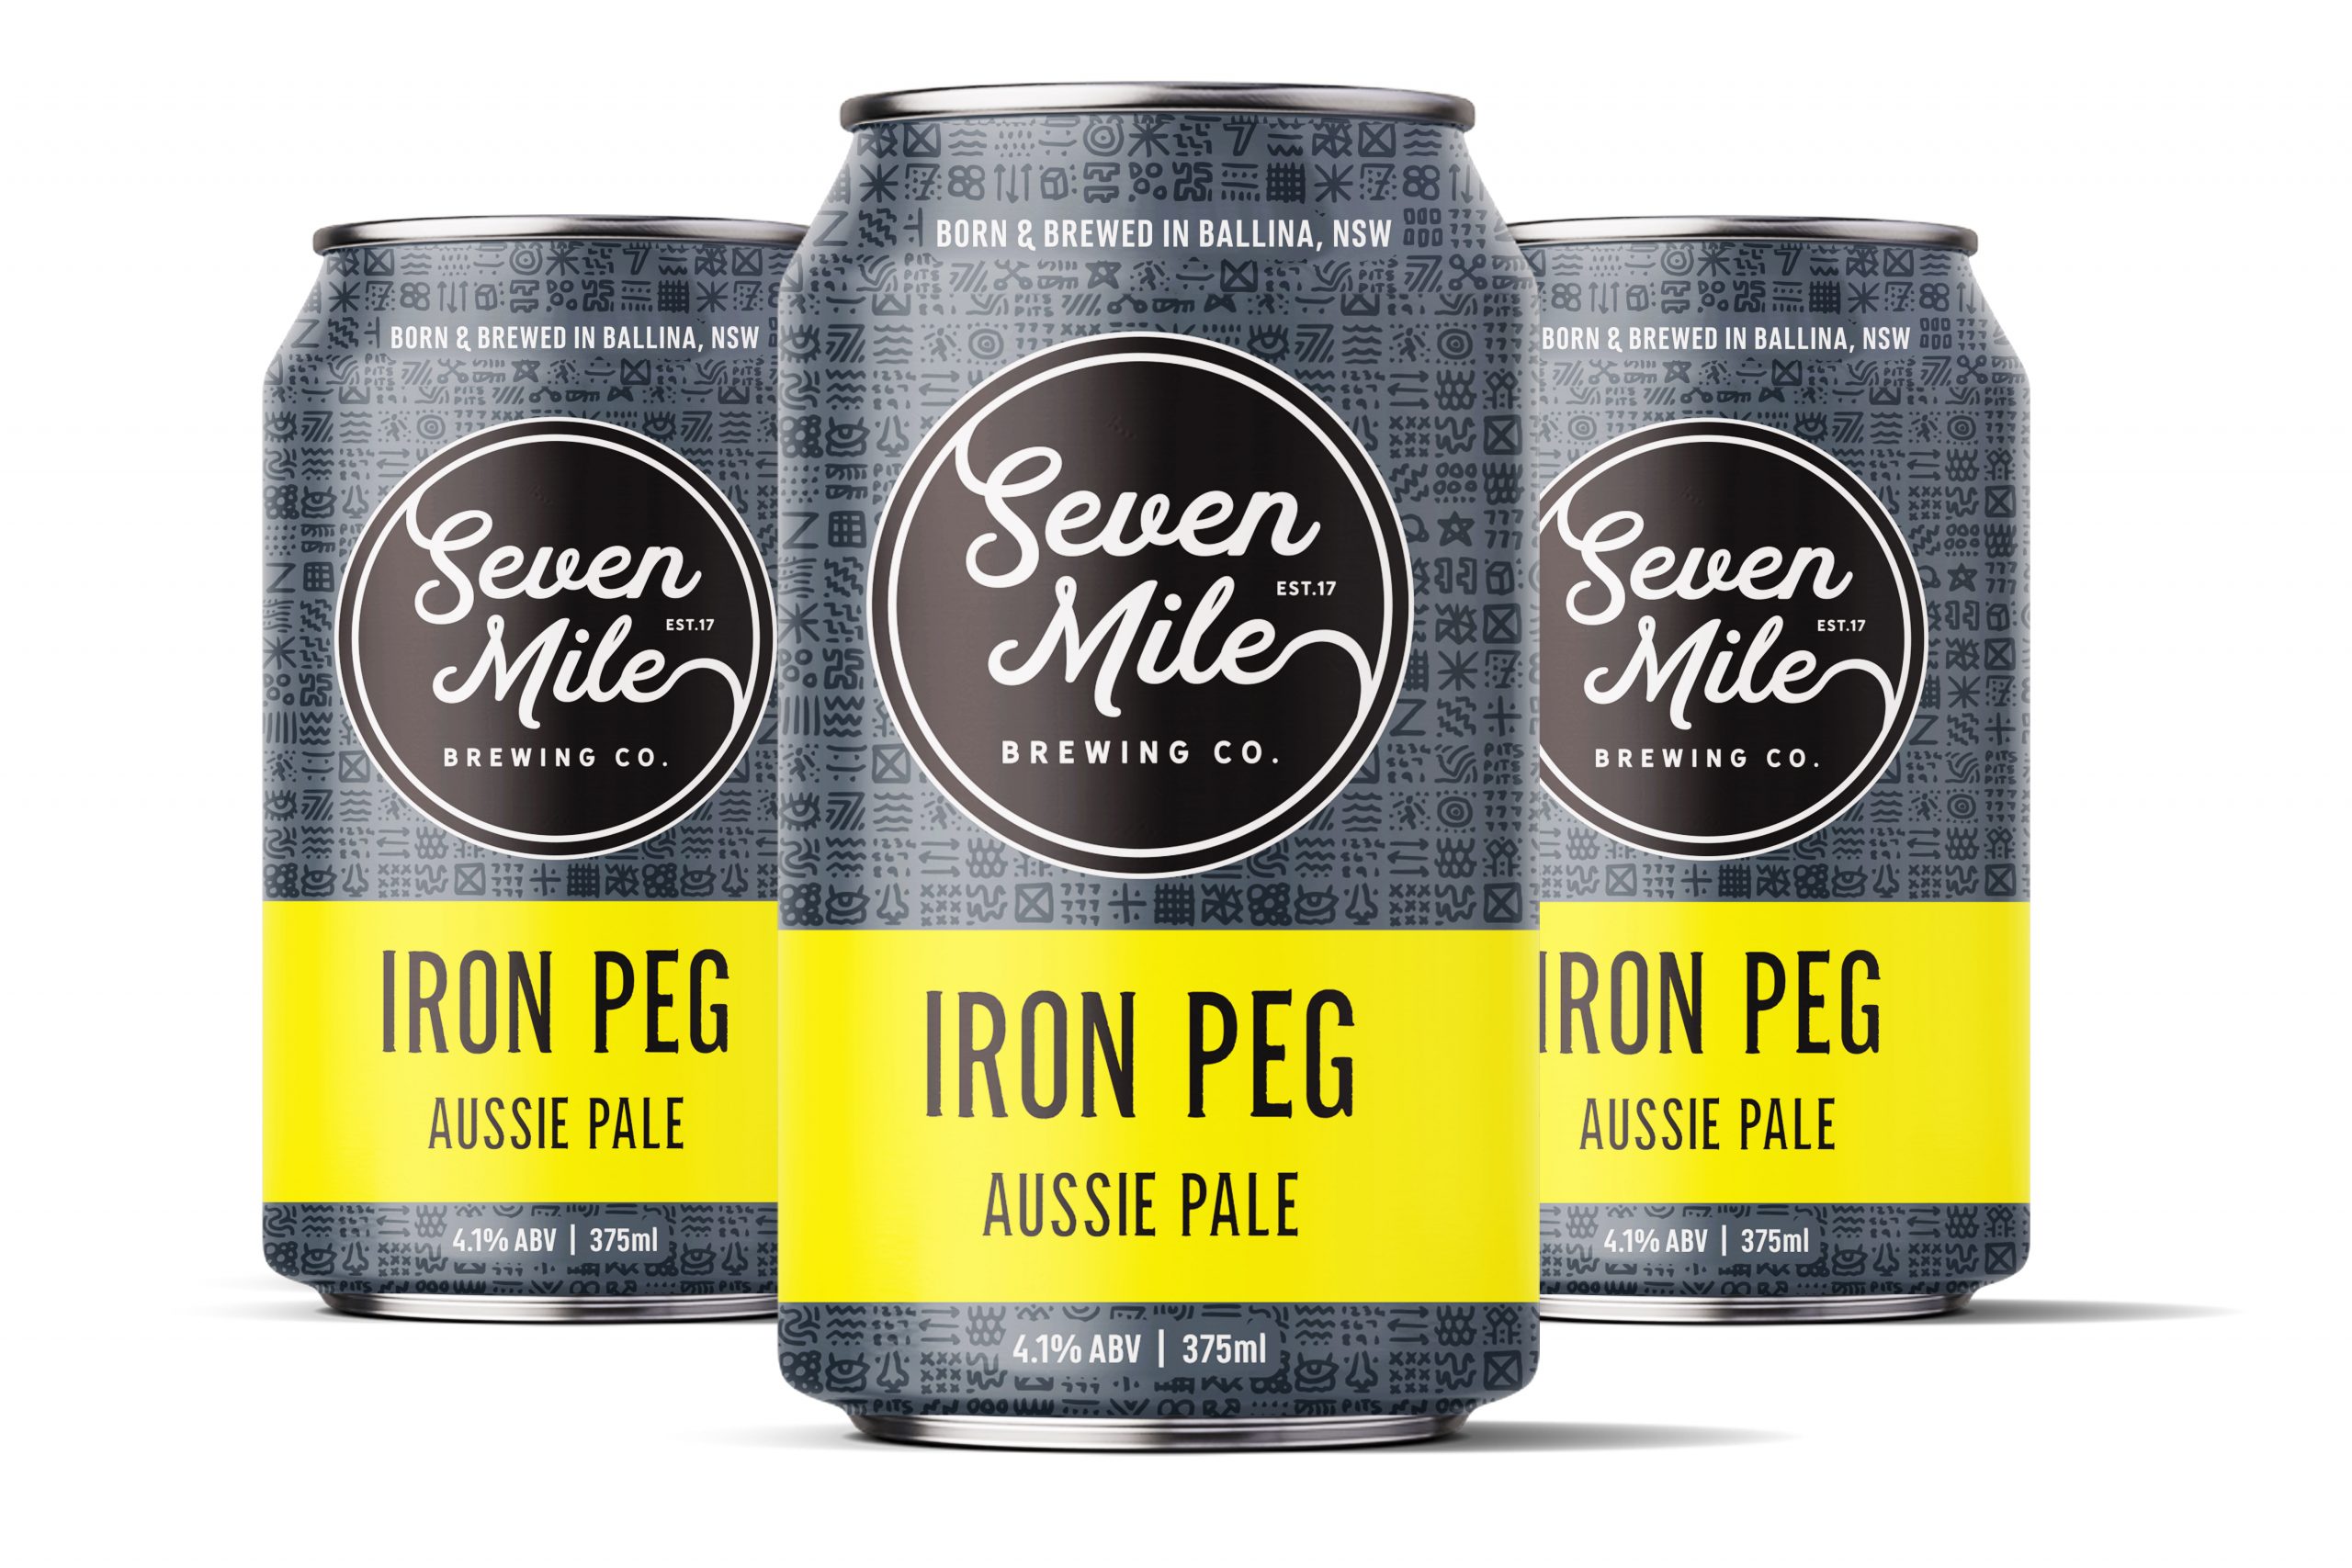 Iron Peg Cans packaging